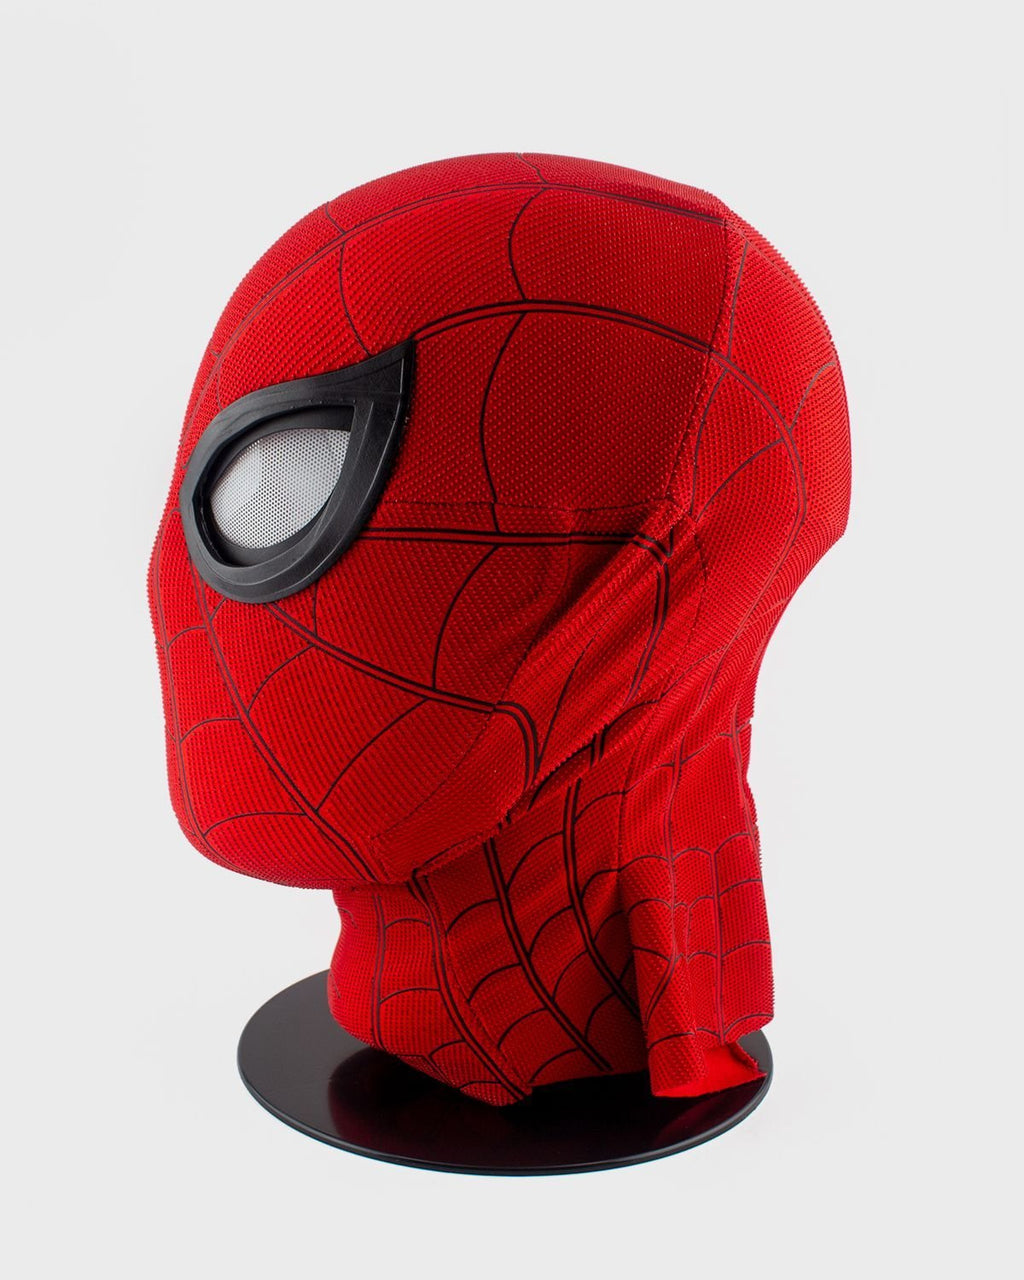 Spider Hero Mask Remote Control Movable Mechanical Eyes Spider Super Hero  Full Mask Moving Lenses Cosplay Wearable Movie Prop Homecoming mask Man for